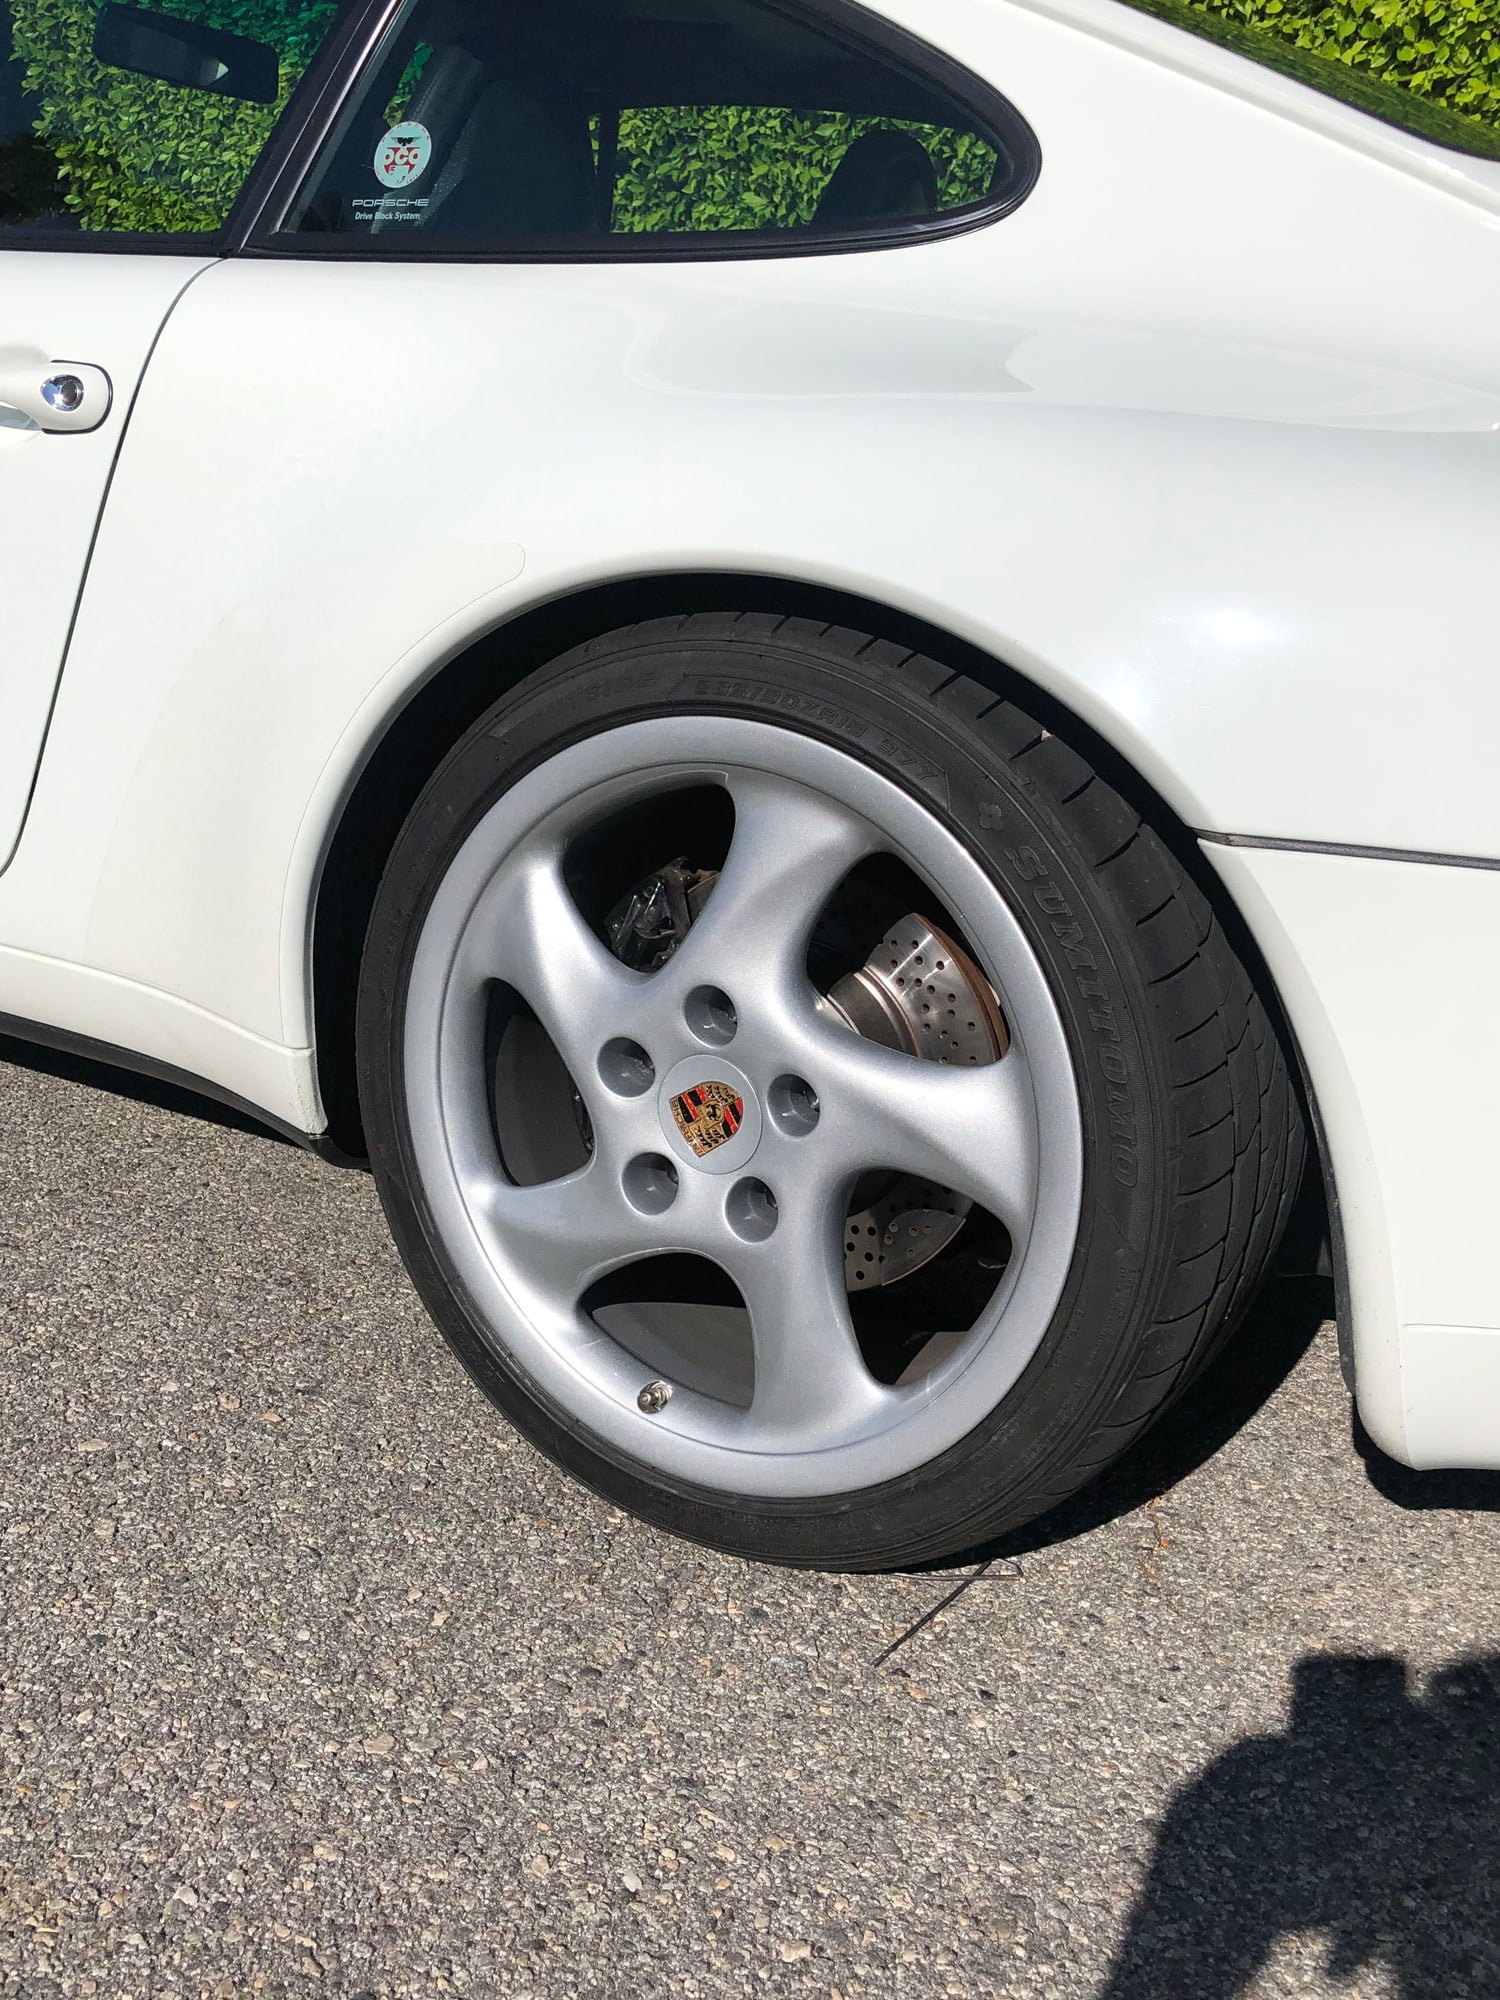 1996 Porsche 911 - 1996 Carrera 6 spd, 51k miles, Sport seats, Limited slip, 18" hollow spoke wheels - Used - VIN wpaa2994ts321871 - 6 cyl - 2WD - Manual - Coupe - White - Palm Springs, CA 92262, United States